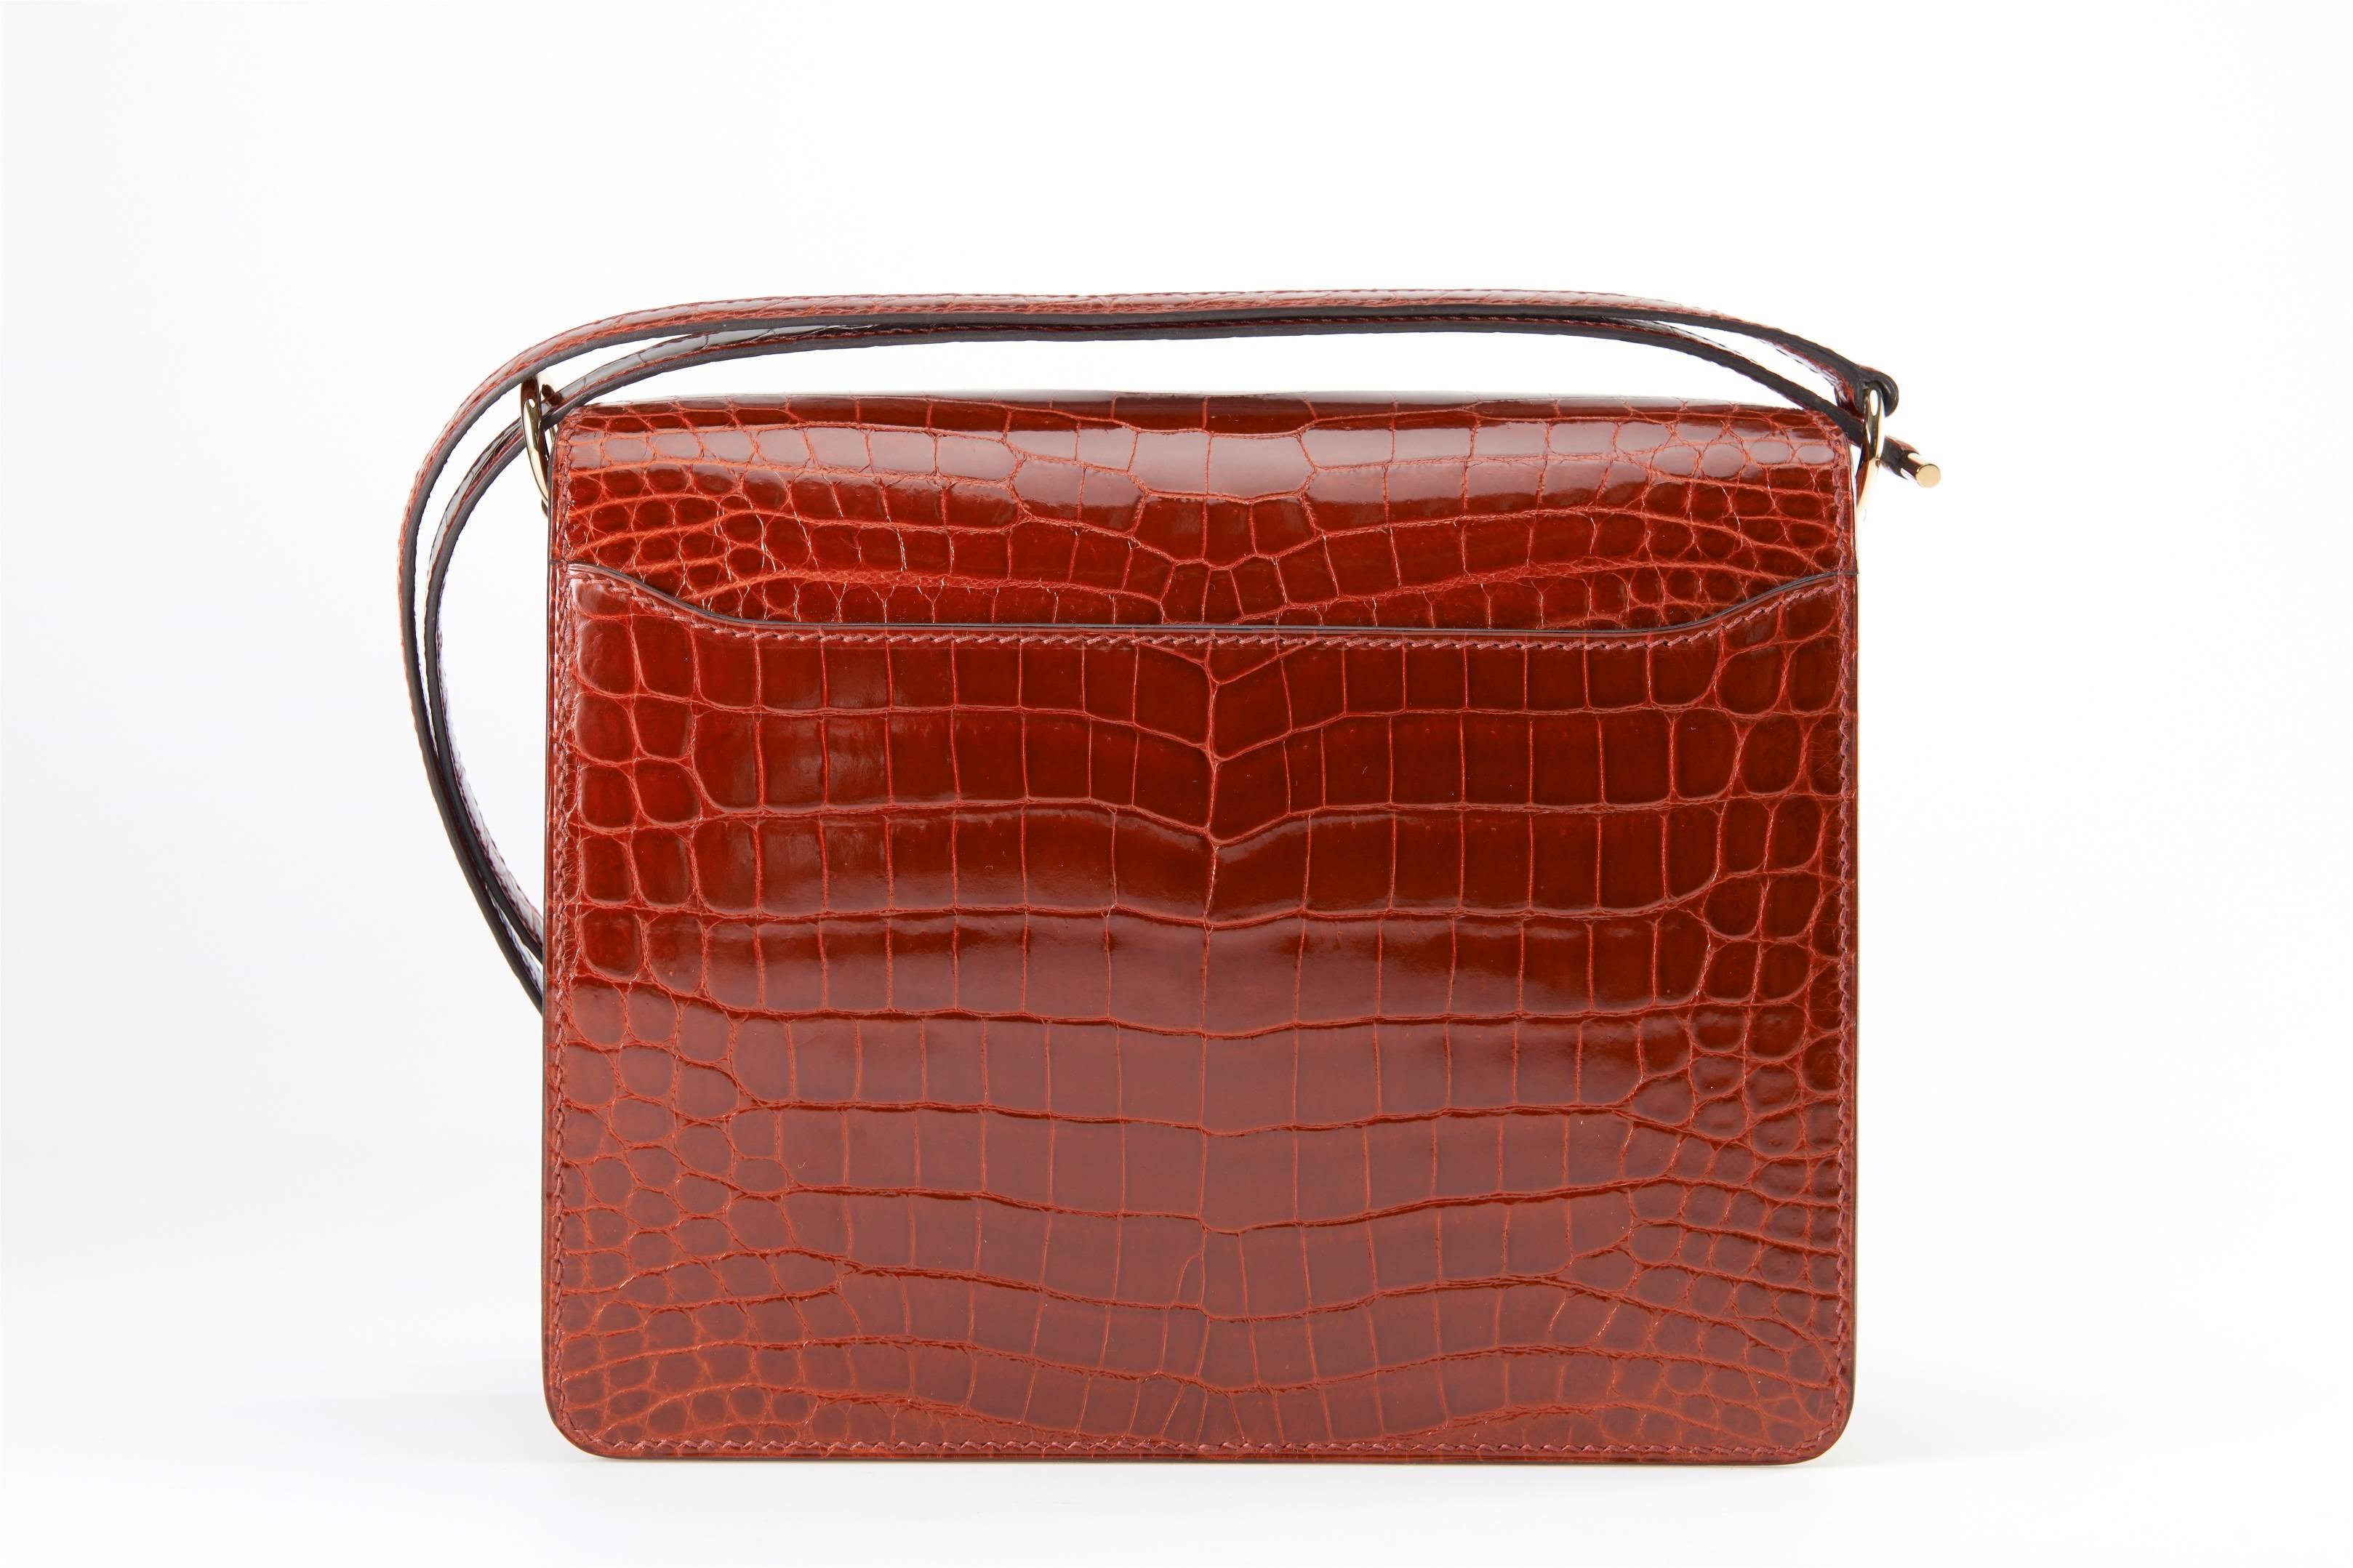 EXCLUSIVE offer - Hermes SHINY ROUGE HERMES NILO crocodile ROULIS with CAPPUCCINO LEATHER COVERING GOLD PERMABRASS HARDWARE. 

THIS BAG IS A WINNER ALL AROUND! IT IS GREAT CROSS BODY OR DOUBLED AS A SHOULDER BAG. HAS A GREAT BACK POCKET FOR A